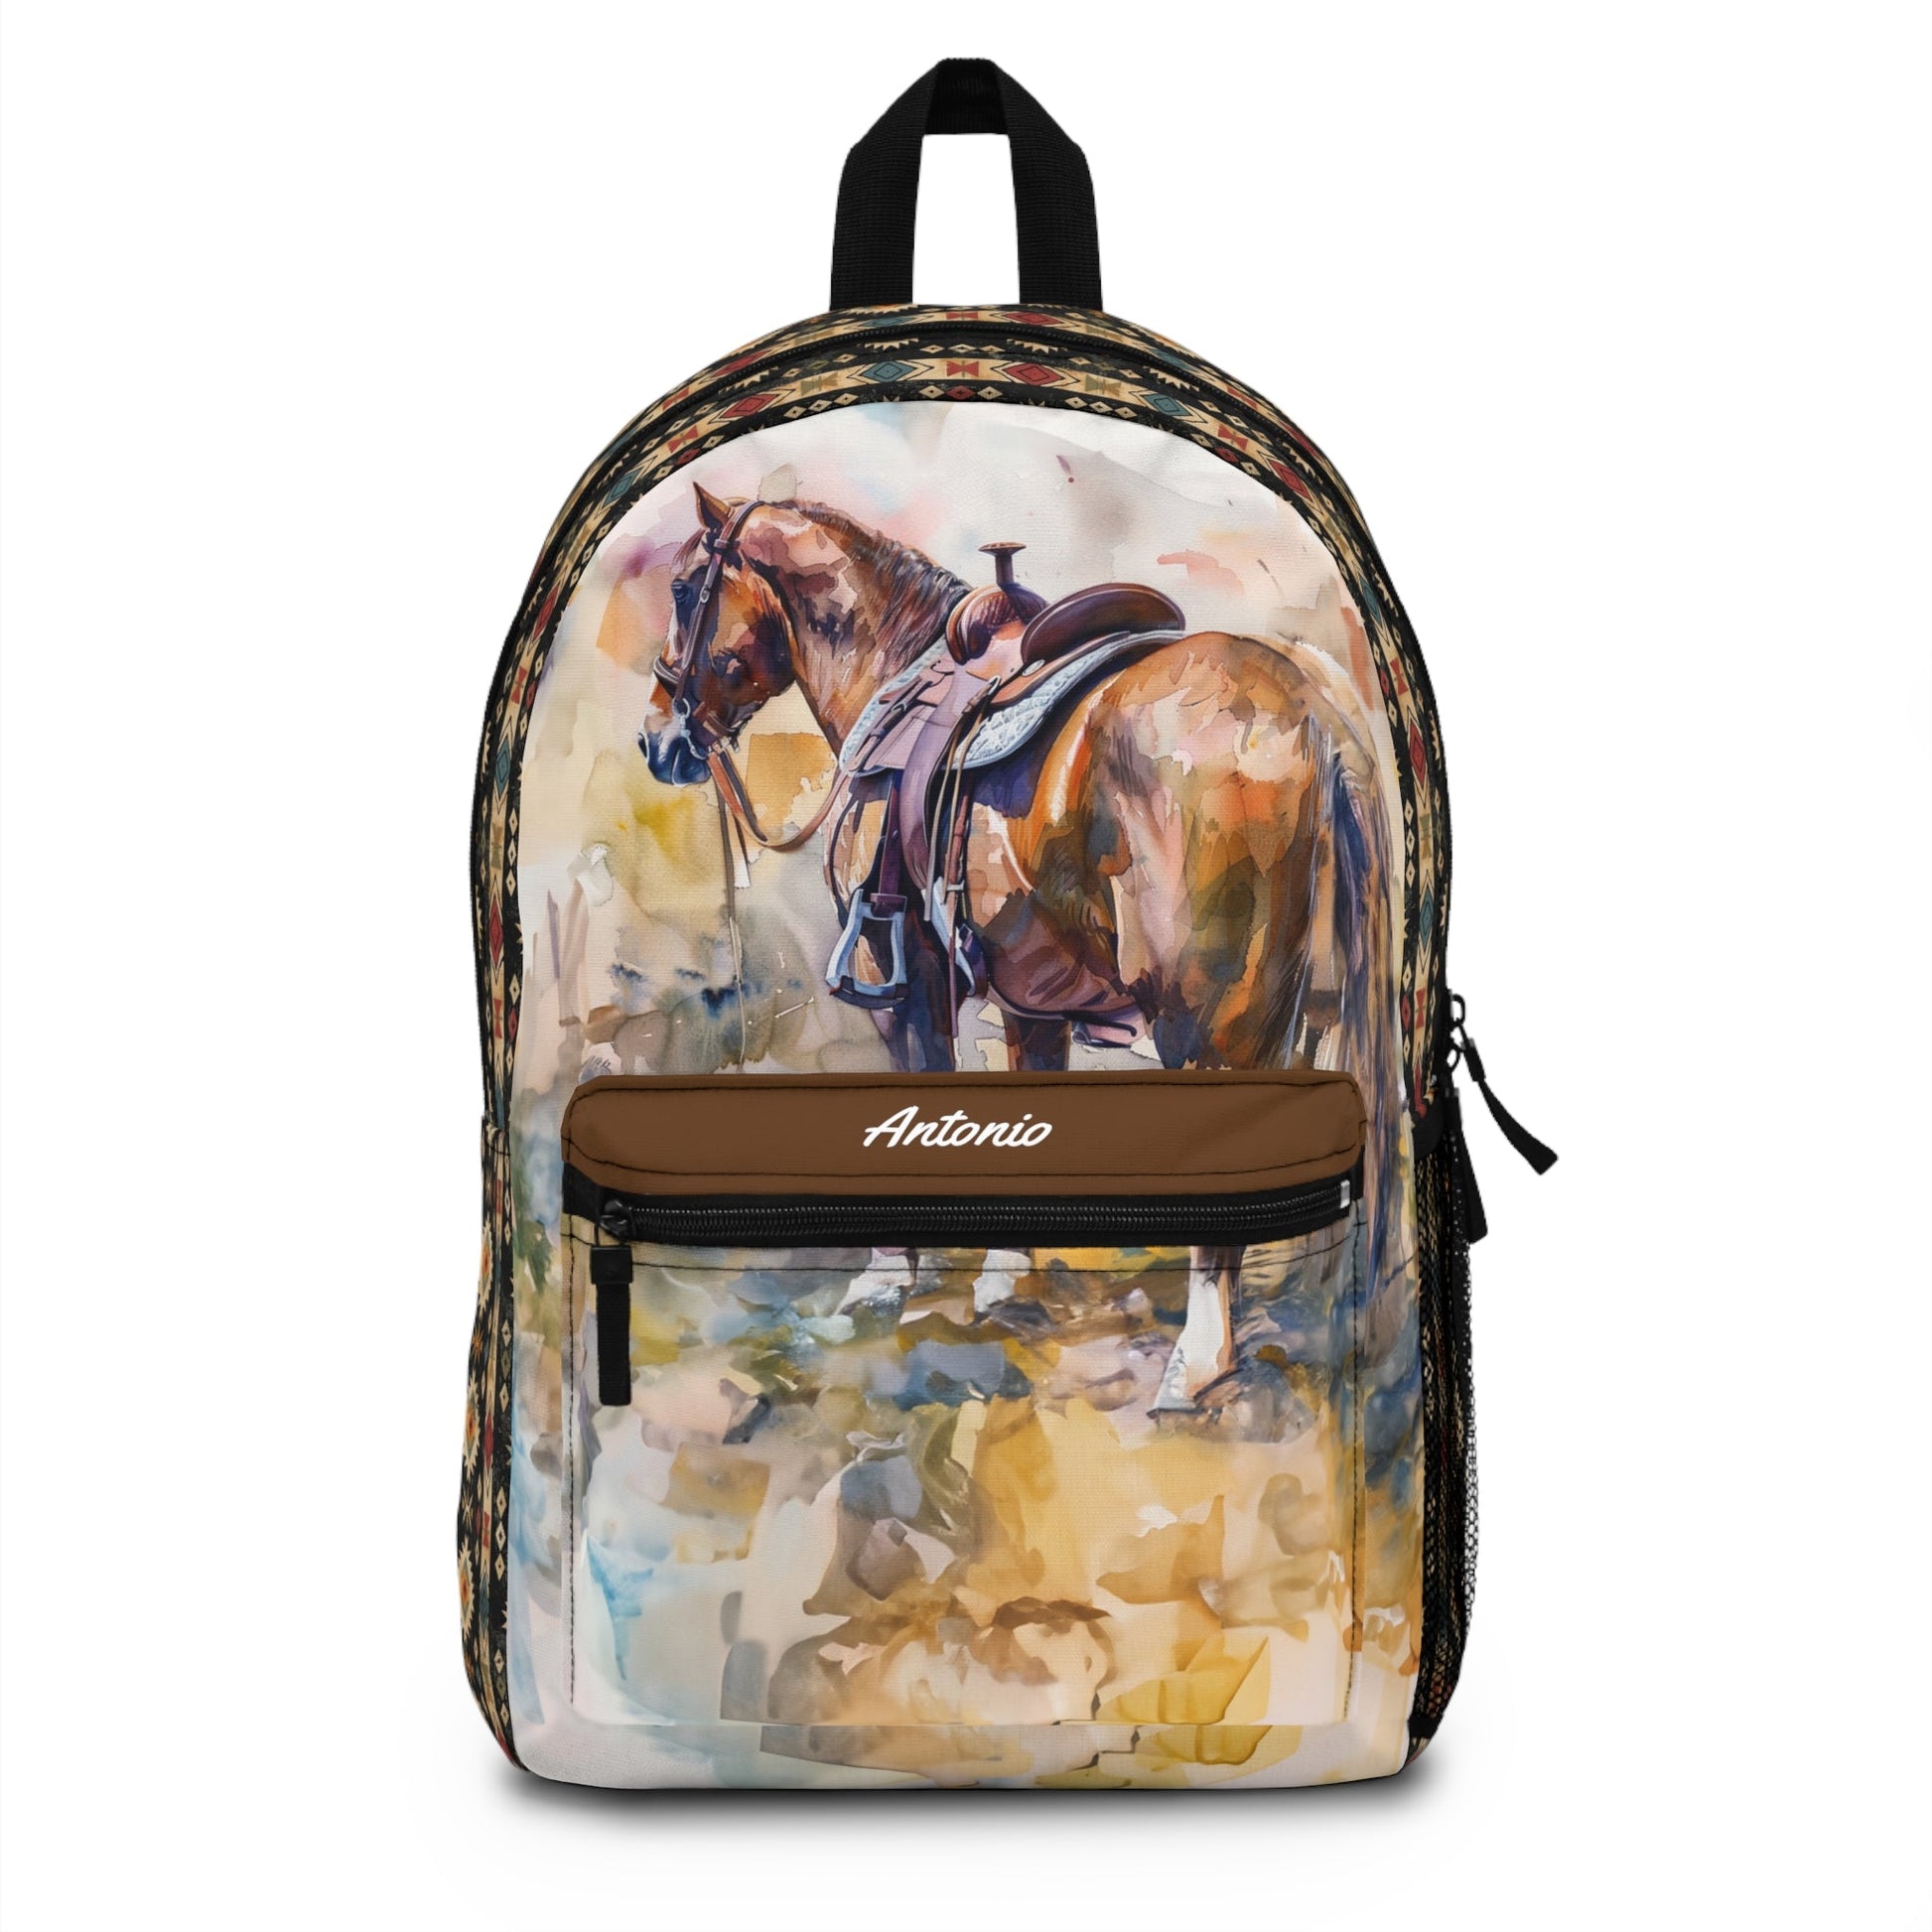 Personalized Western Horse Backpack with Aztec Design, Fun and Beautiful Watercolor - FlooredByArt